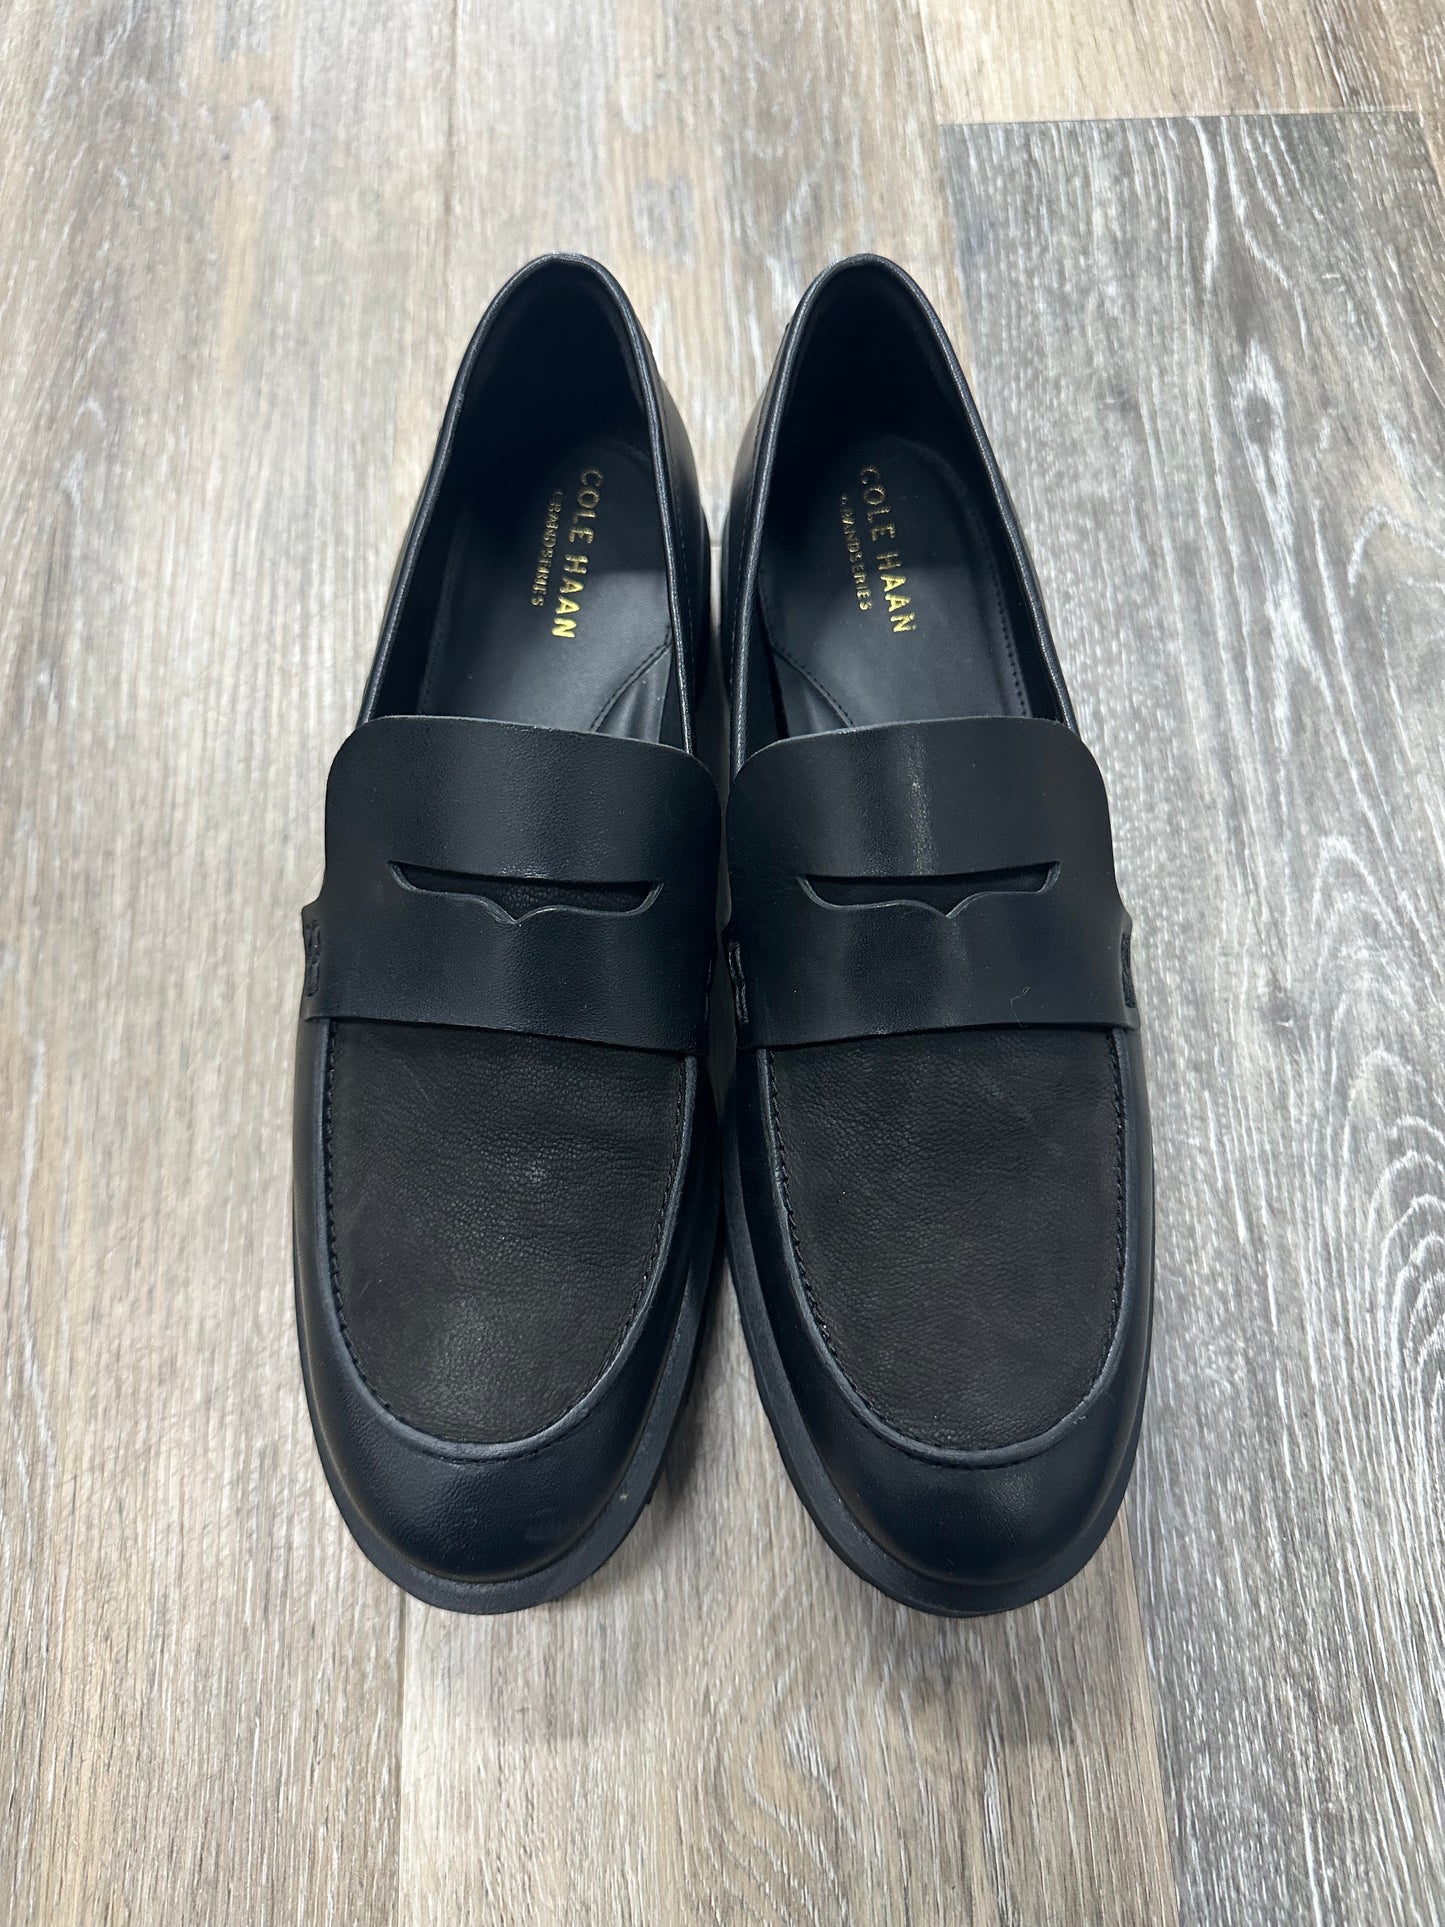 Shoes Flats By Cole-haan  Size: 8.5